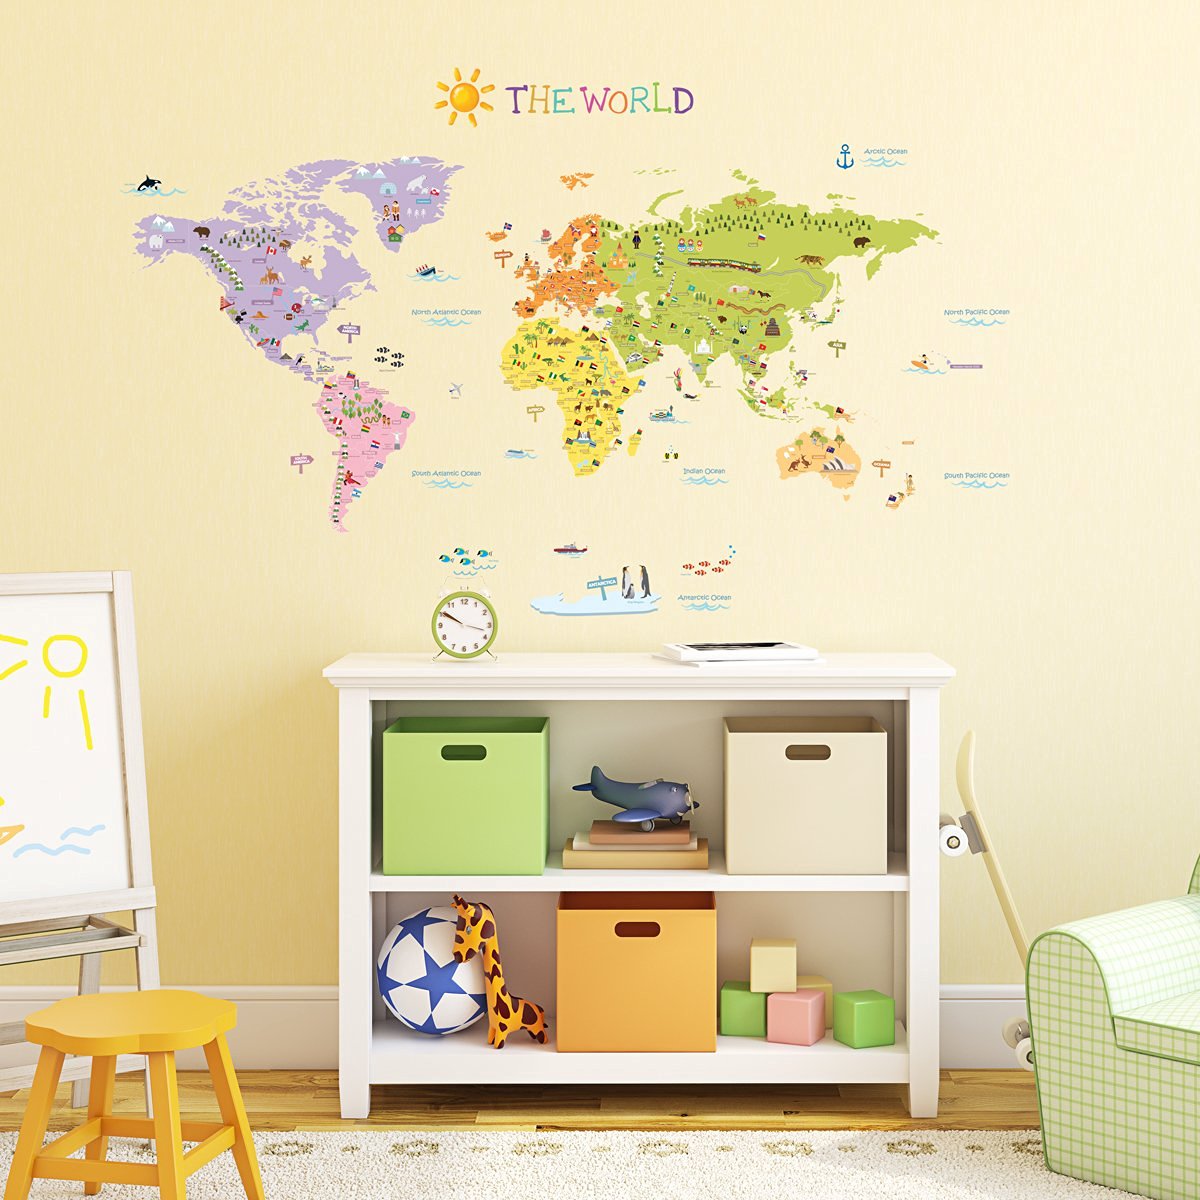 The World Map Peel & Stick Wall Decals – Just $19.95!